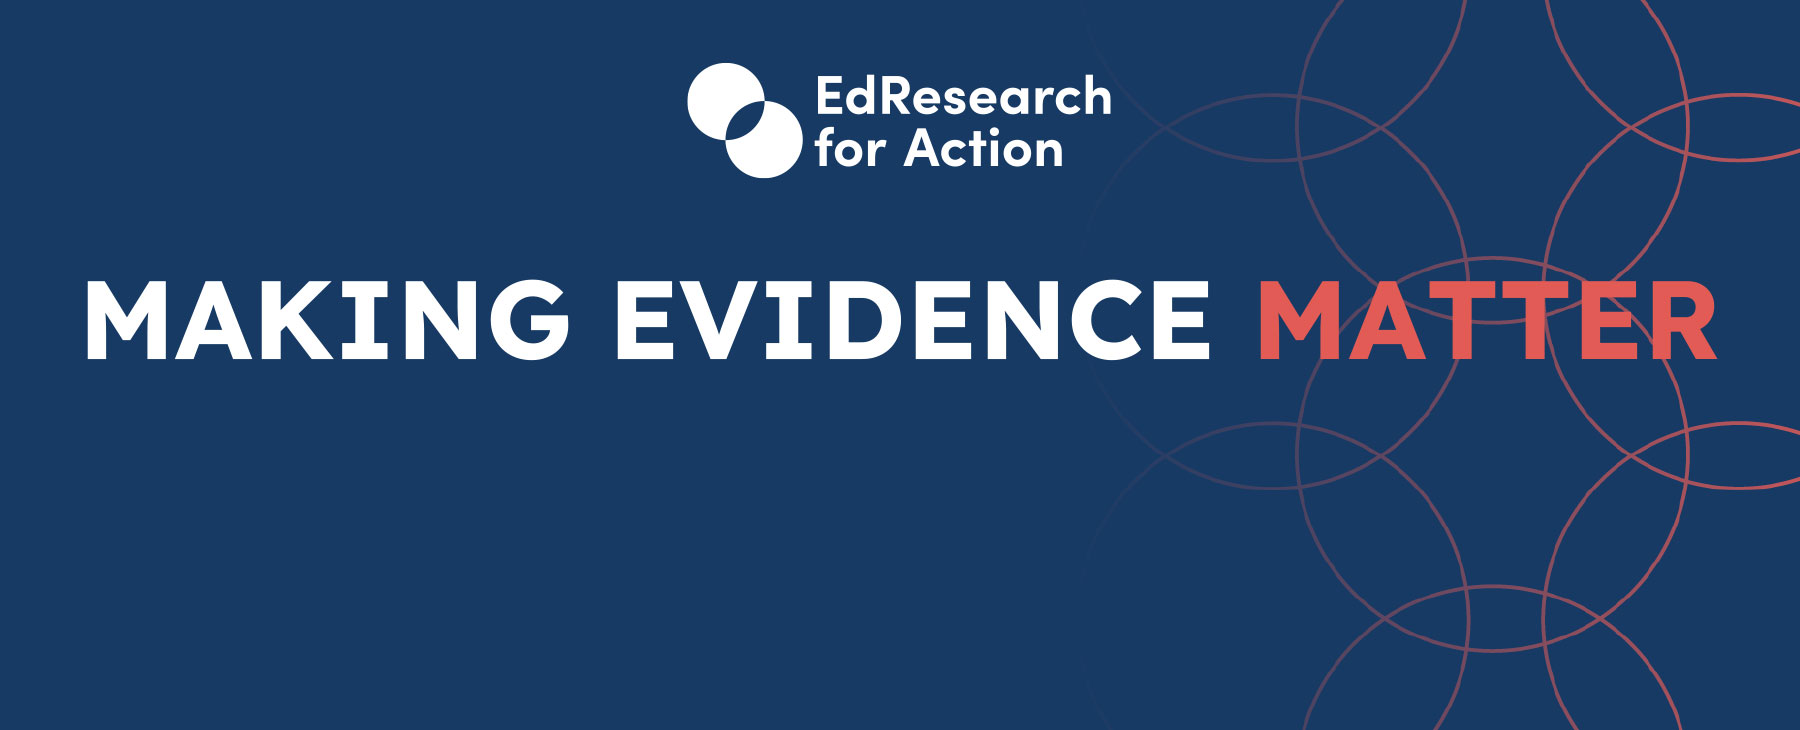 EdResearch for Action